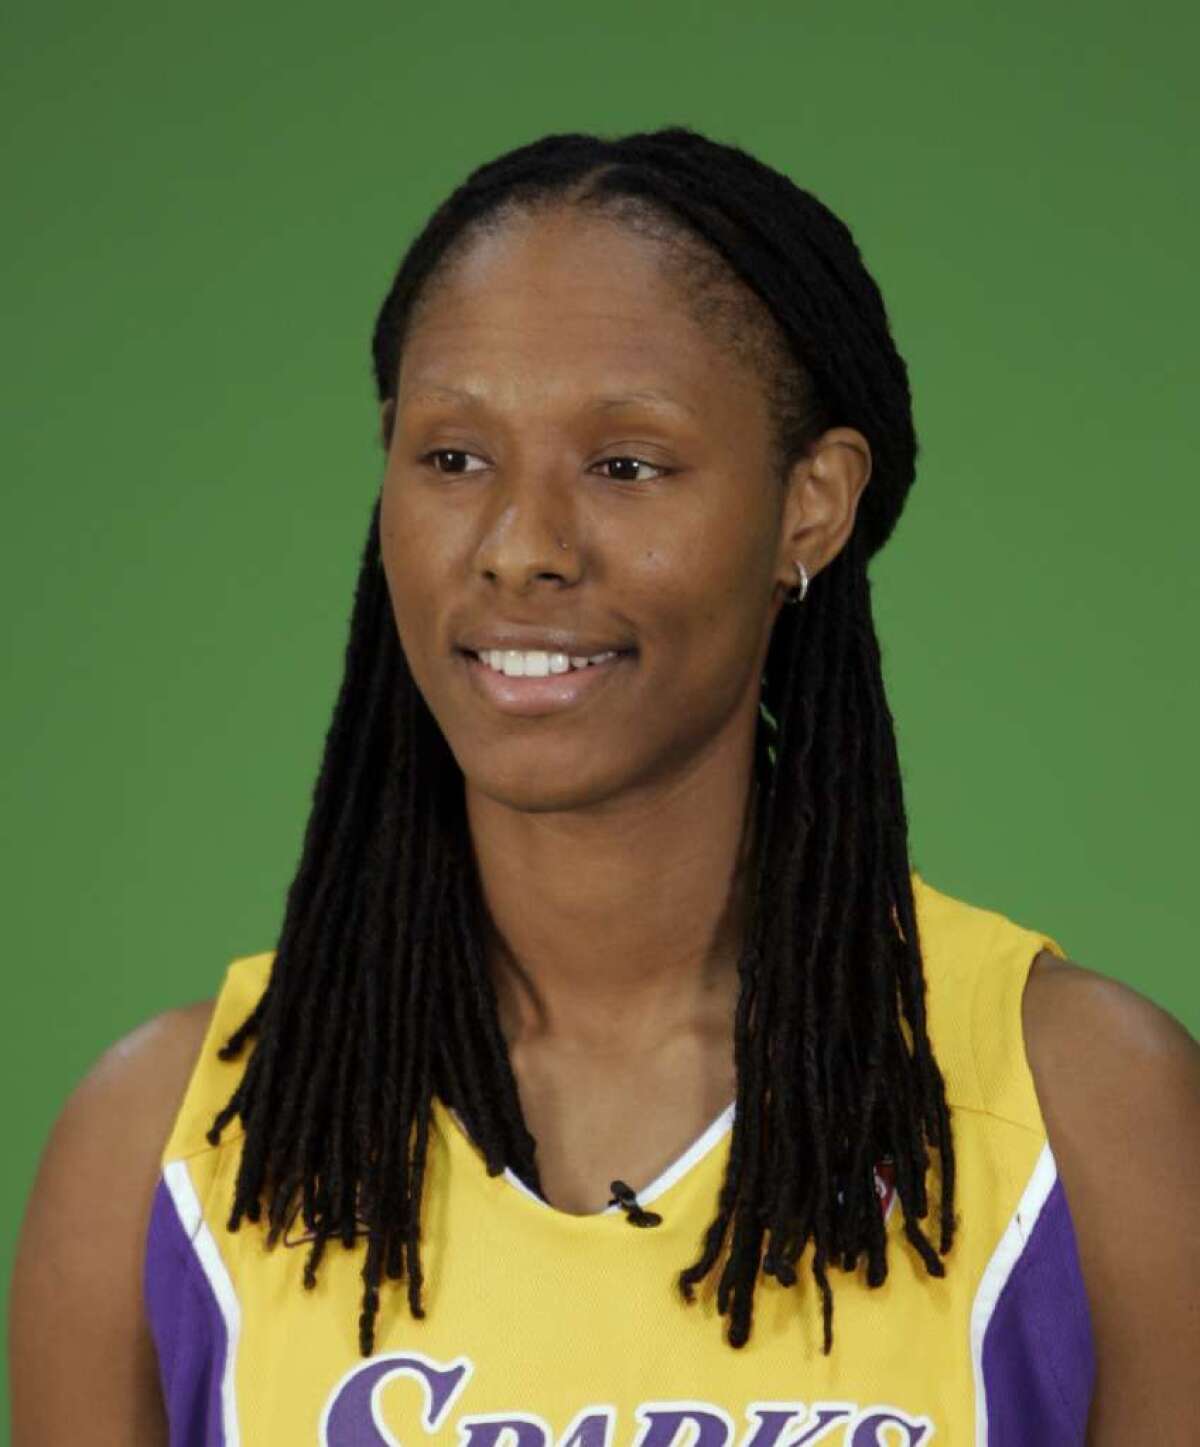 Former Sparks player Chamique Holdsclaw has been indicted on six counts after allegedly assaulting her ex-girlfriend in November.